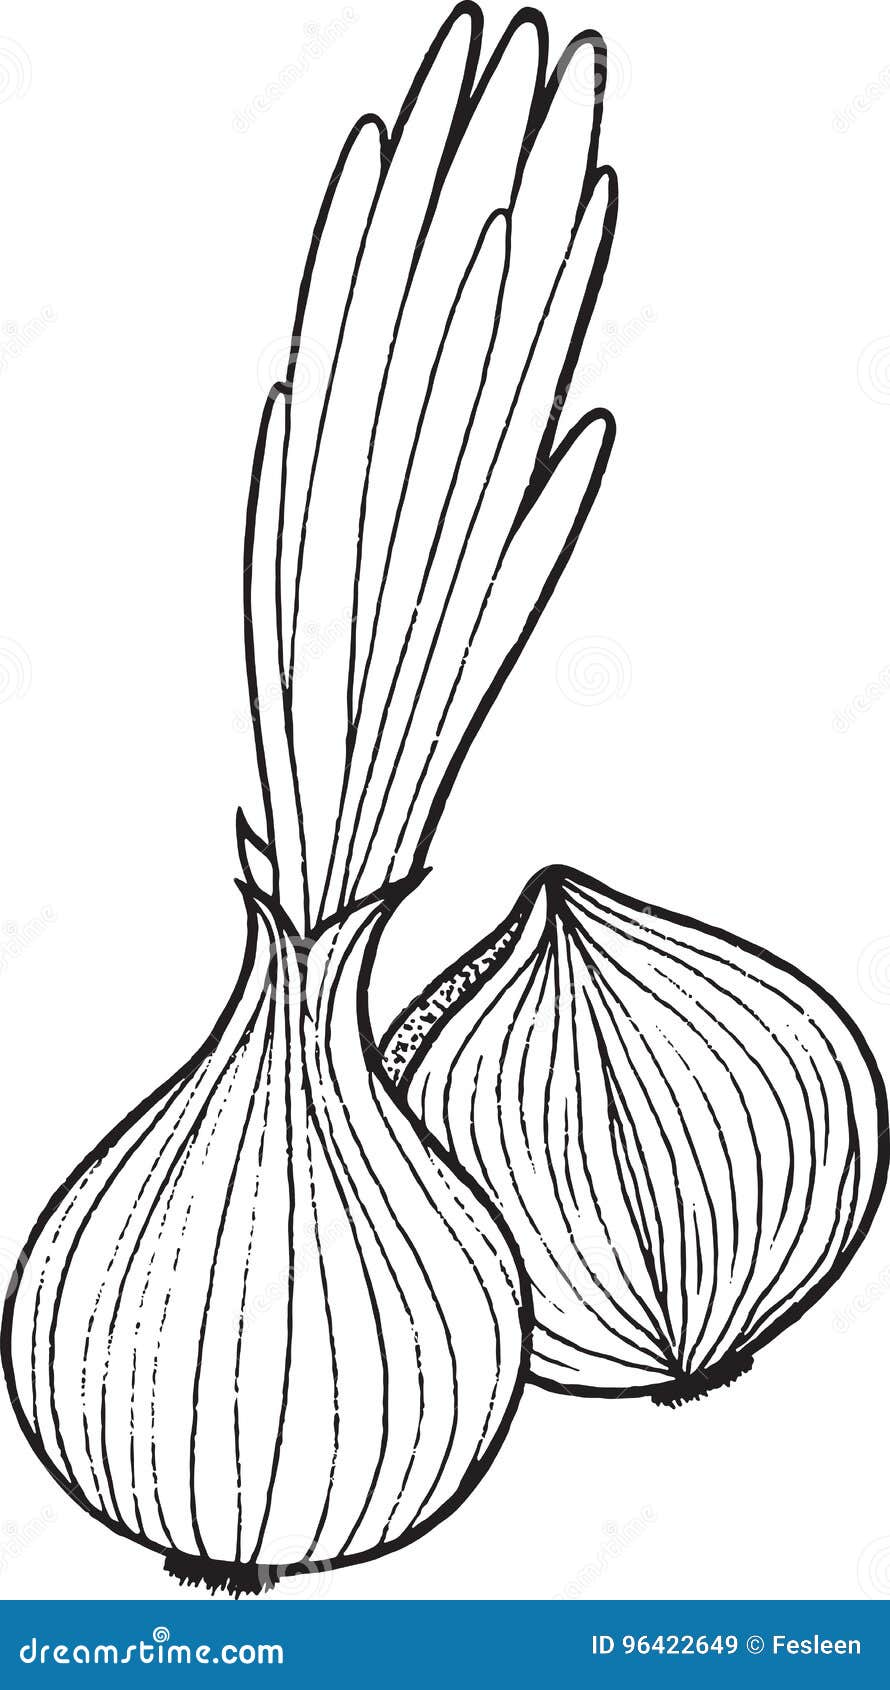 Onion coloring page hand drawn illustration stock vector